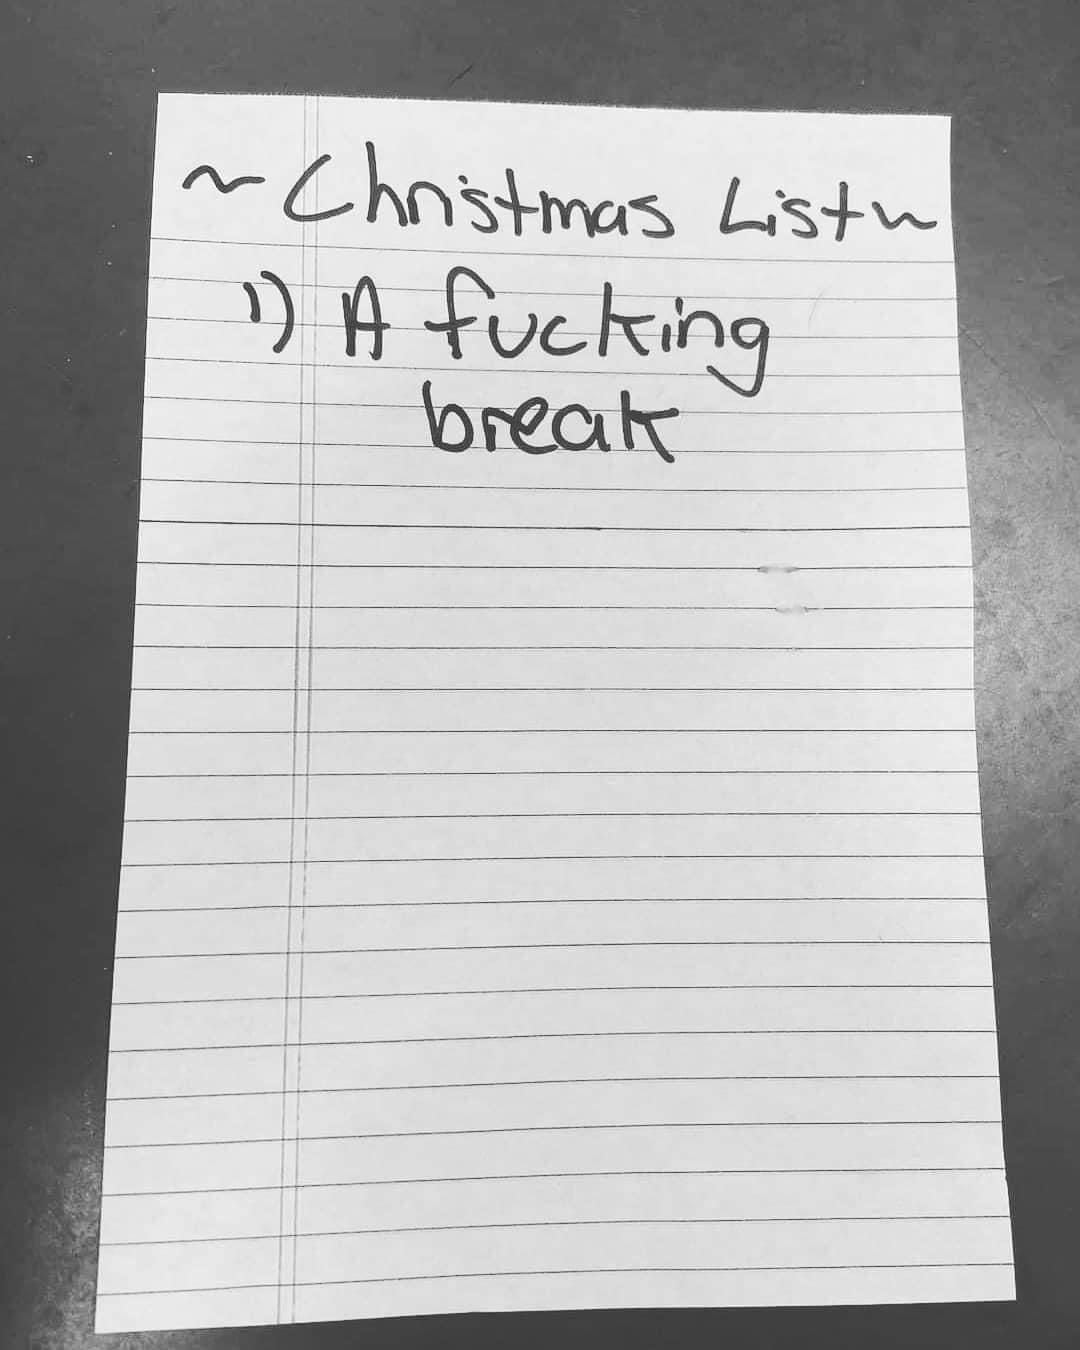 Started my 2020 Christmas list early this year